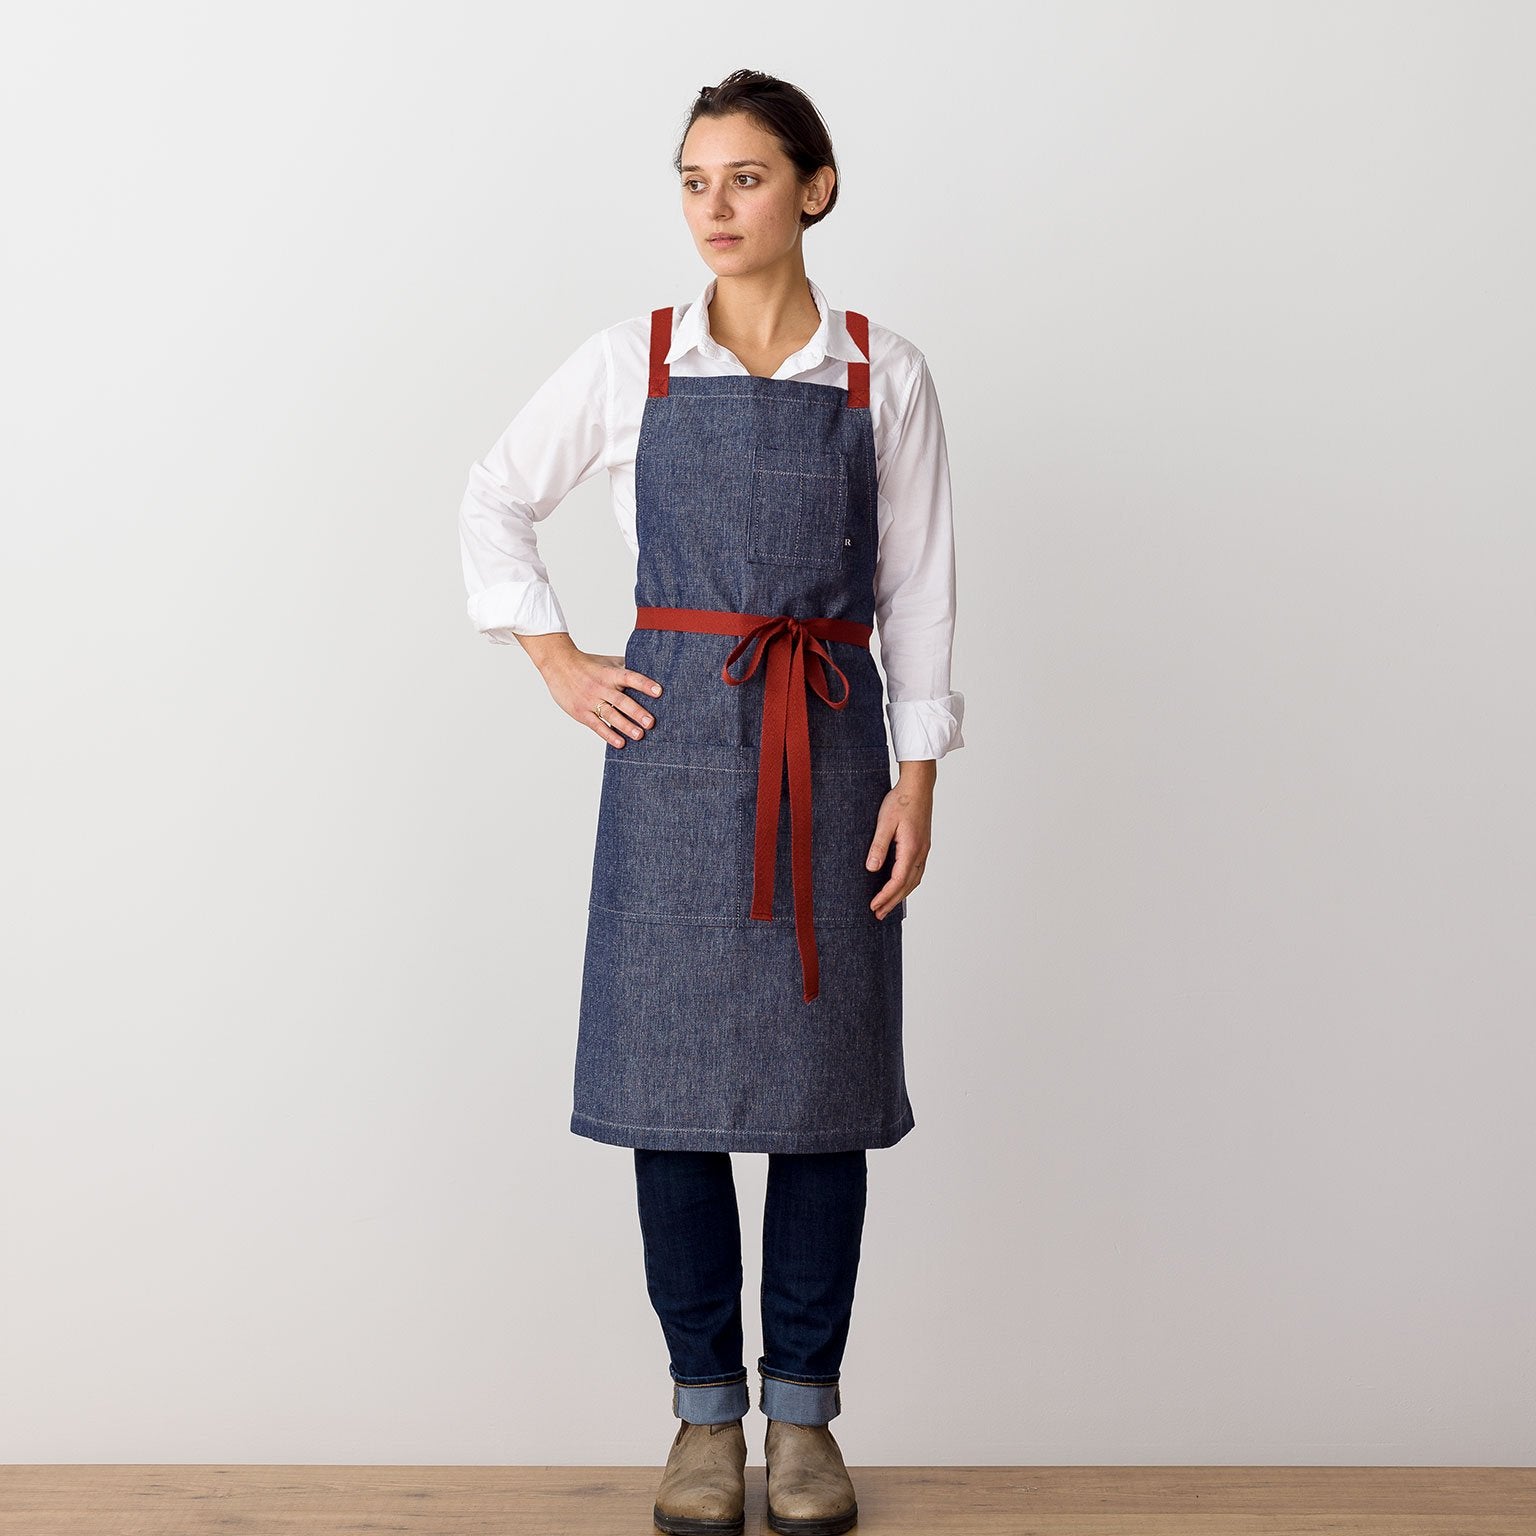 How To Make a Kid's Craft Apron Out of Old Jeans - Happy Hooligans